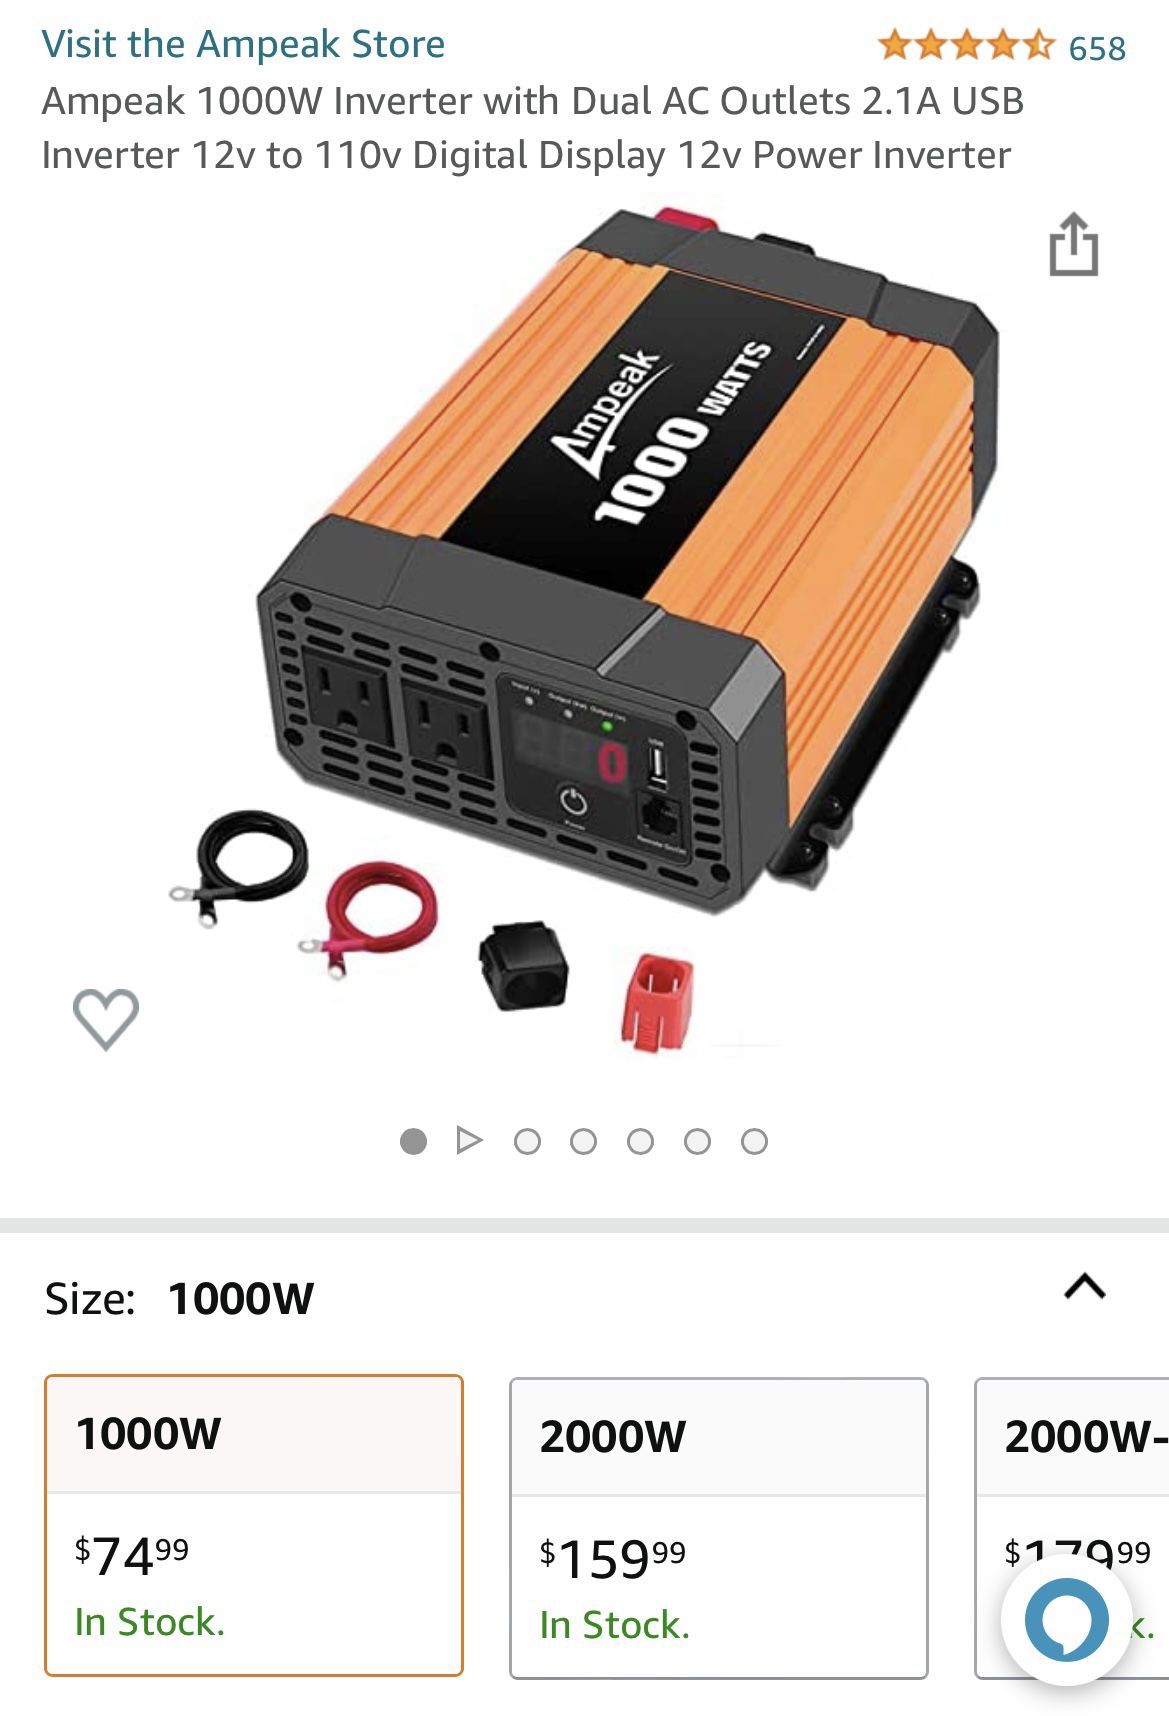 Ampeak 1000W Inverter with Dual AC Outlets